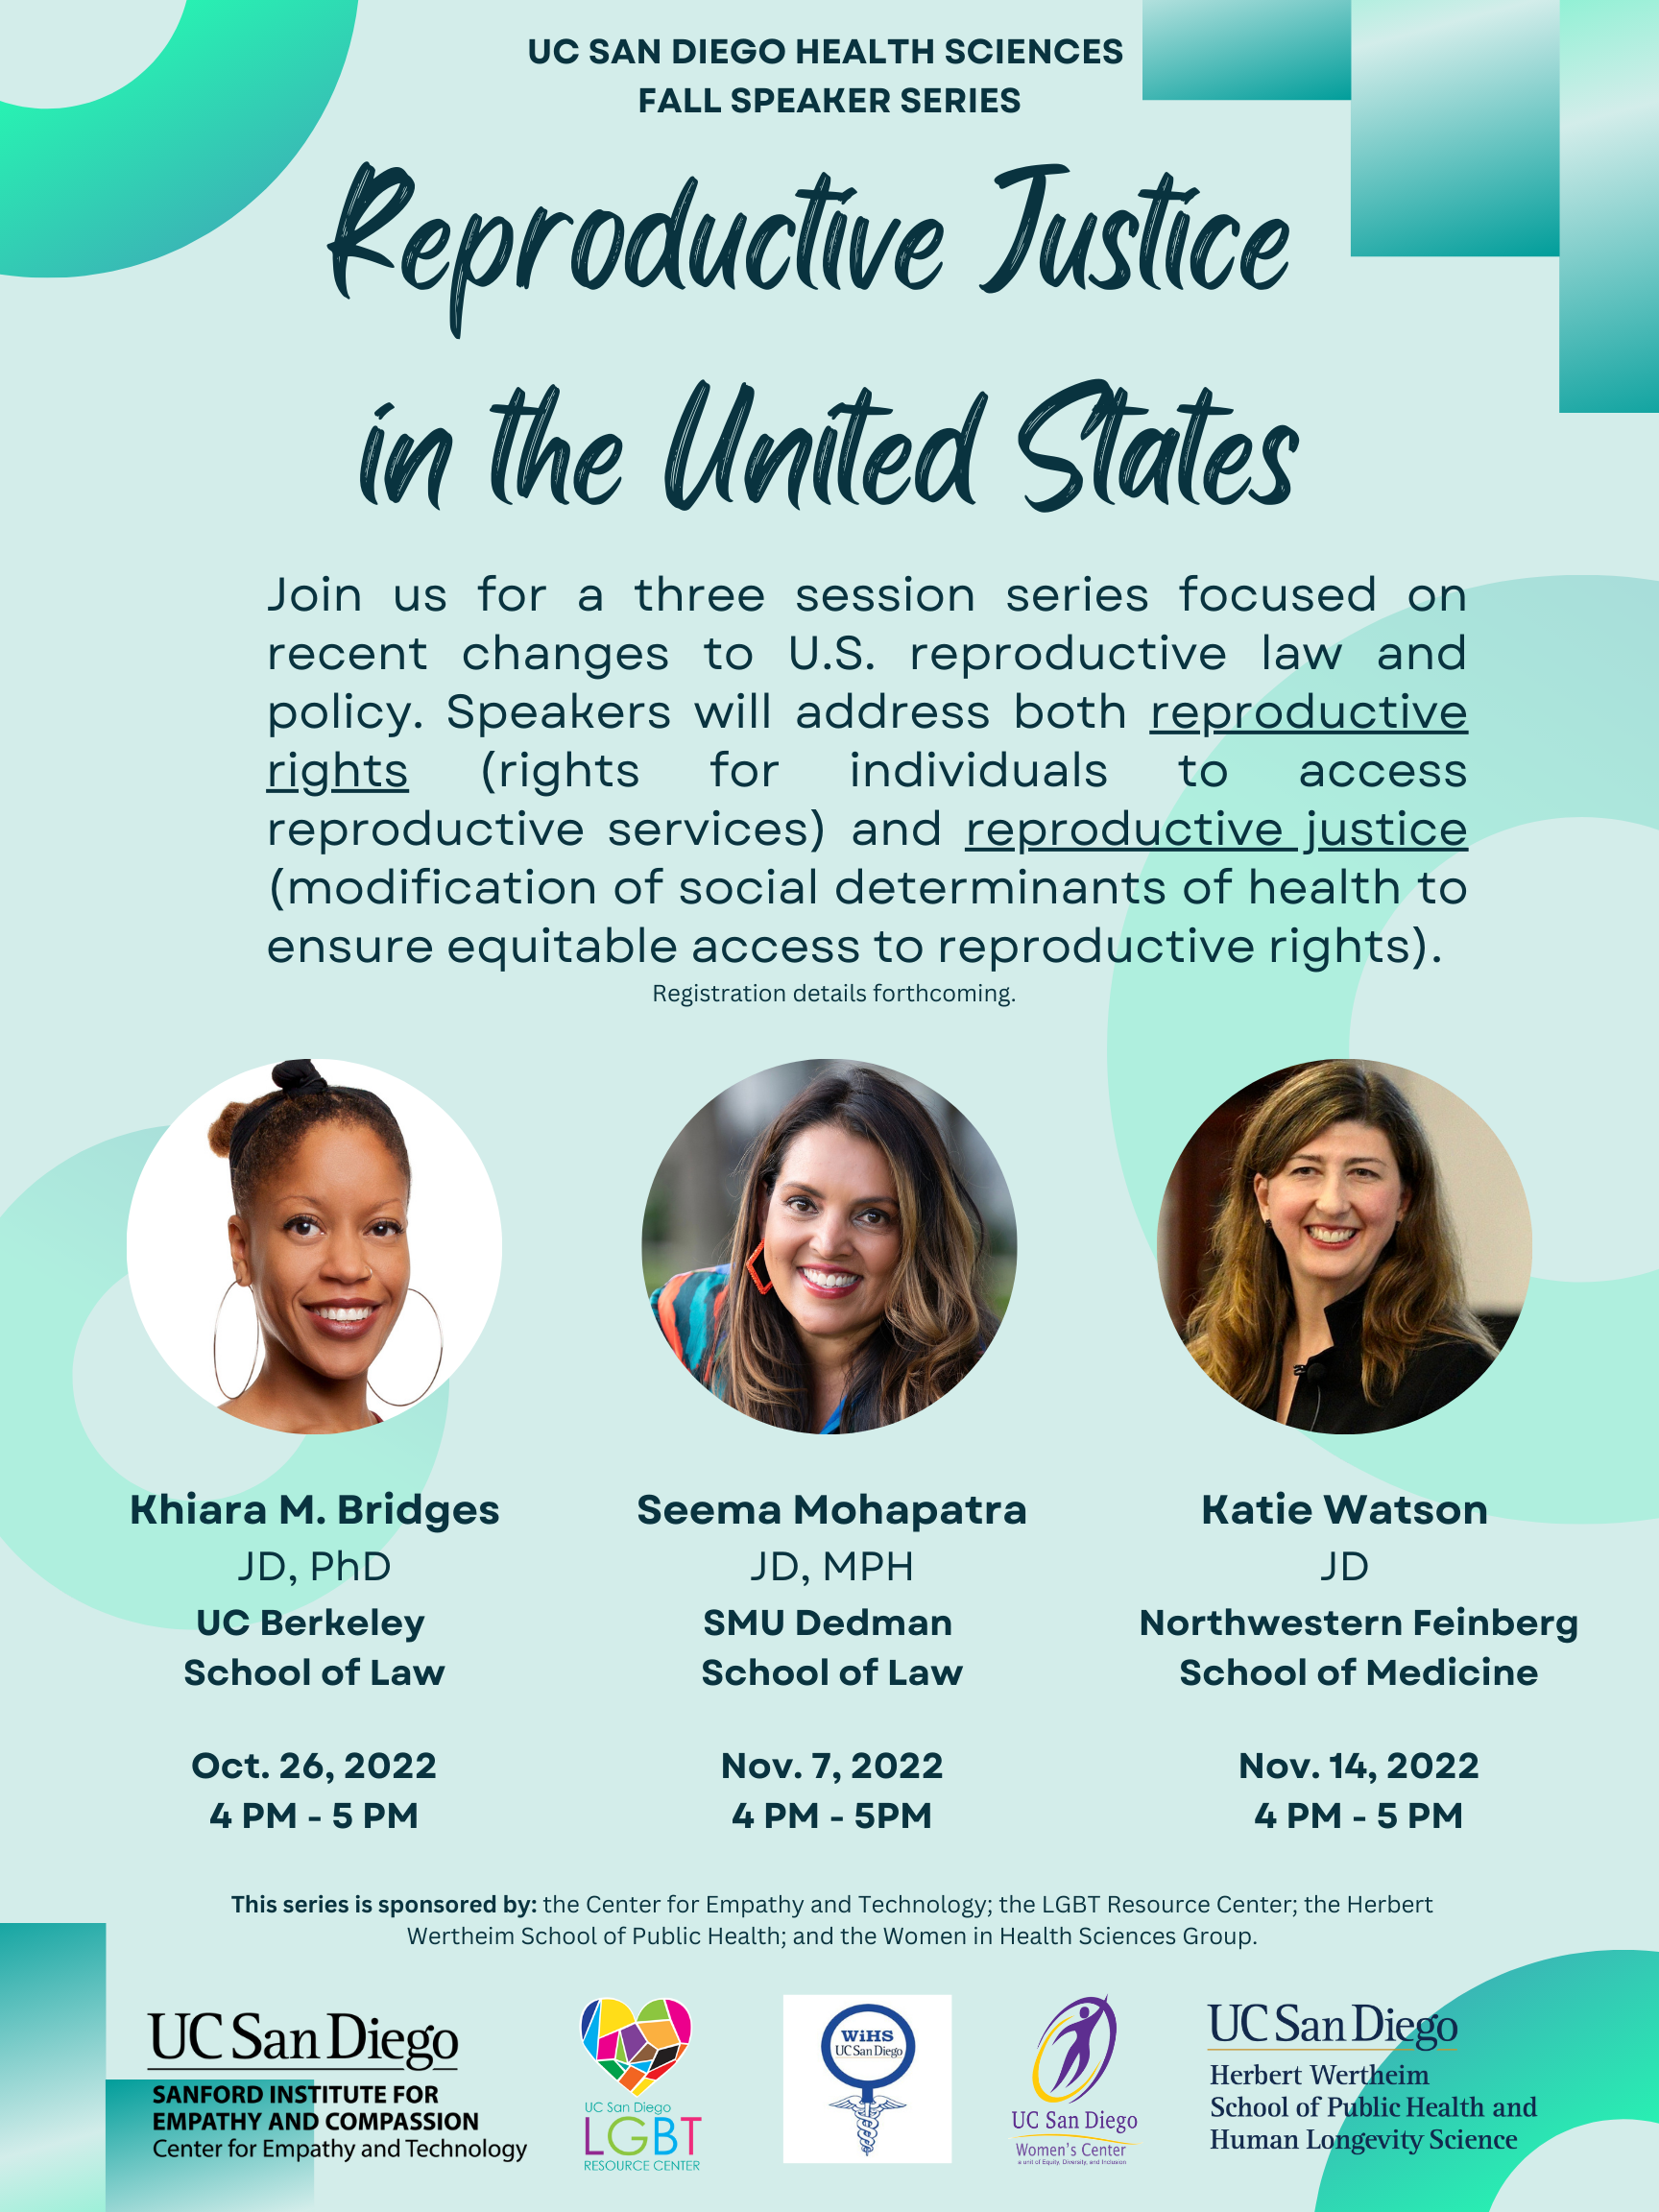 The recruitment flyer for the series, showing all three series speakers: Khiara M. Bridges, Seema Mohapatra, and Katie Watson. The series is titled Reproductive Justice in the United States and states "Join us for a three session series focused on recent changes to U.S. reproductive law and policy. Speakers will address both reproductive rights (rights for individuals to access reproductive services) and reproductive justice (modification of social determinants of health to ensure equitable access to reproductive rights).